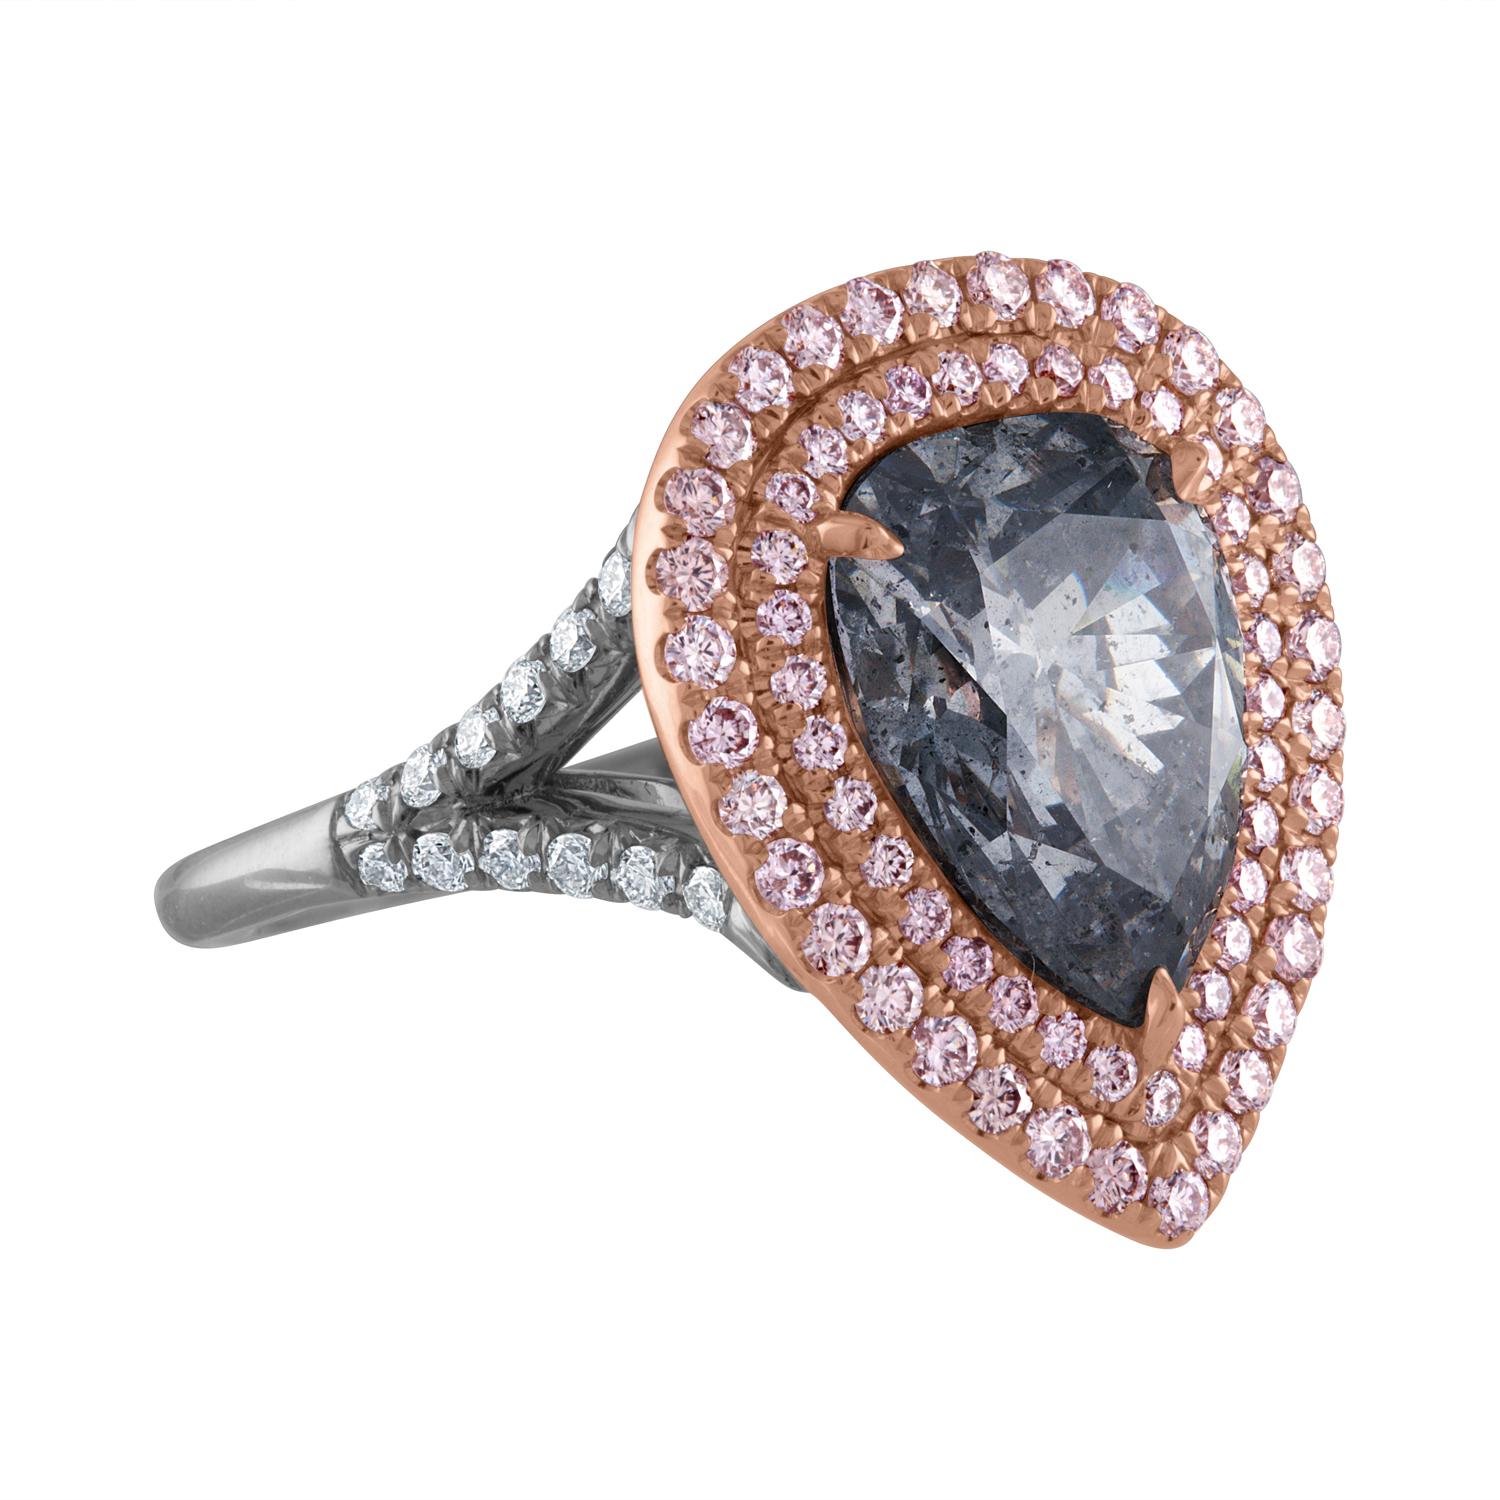 A GIA Certified Diamond as Fancy Light Gray Blue is set in Hand Crafted Platinum & 18K Pink Gold.
Surrounding the Pear Shape Diamond are Two rows of Pink Diamonds. The shank is split and dressed up with White Diamonds on the Split part of the Shank.